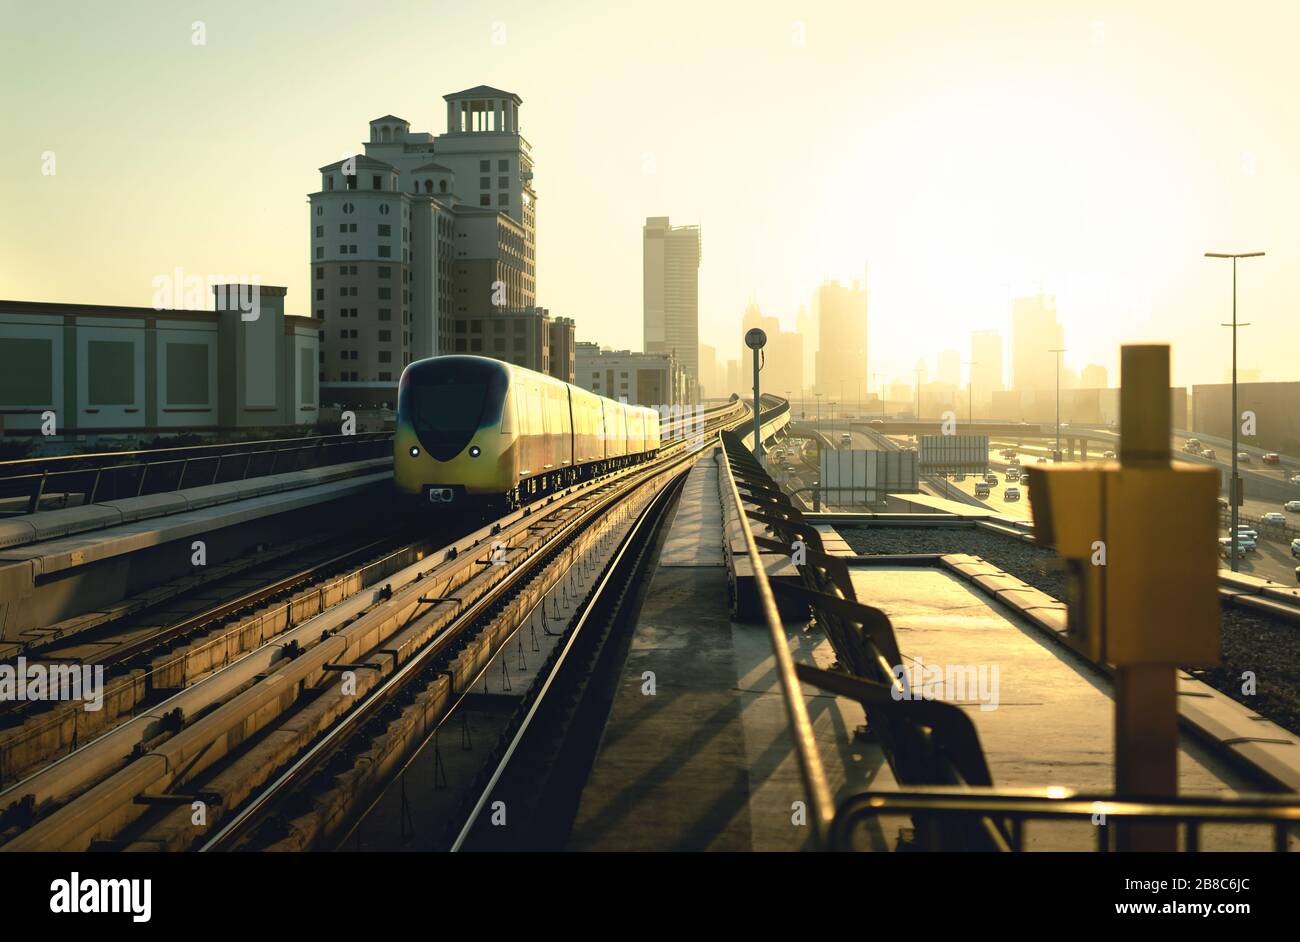 Dubai metro at sunset. Modern subway, car traffic on highway and business buildings. City downtown skyline and railway at golden hour dusk. Stock Photo